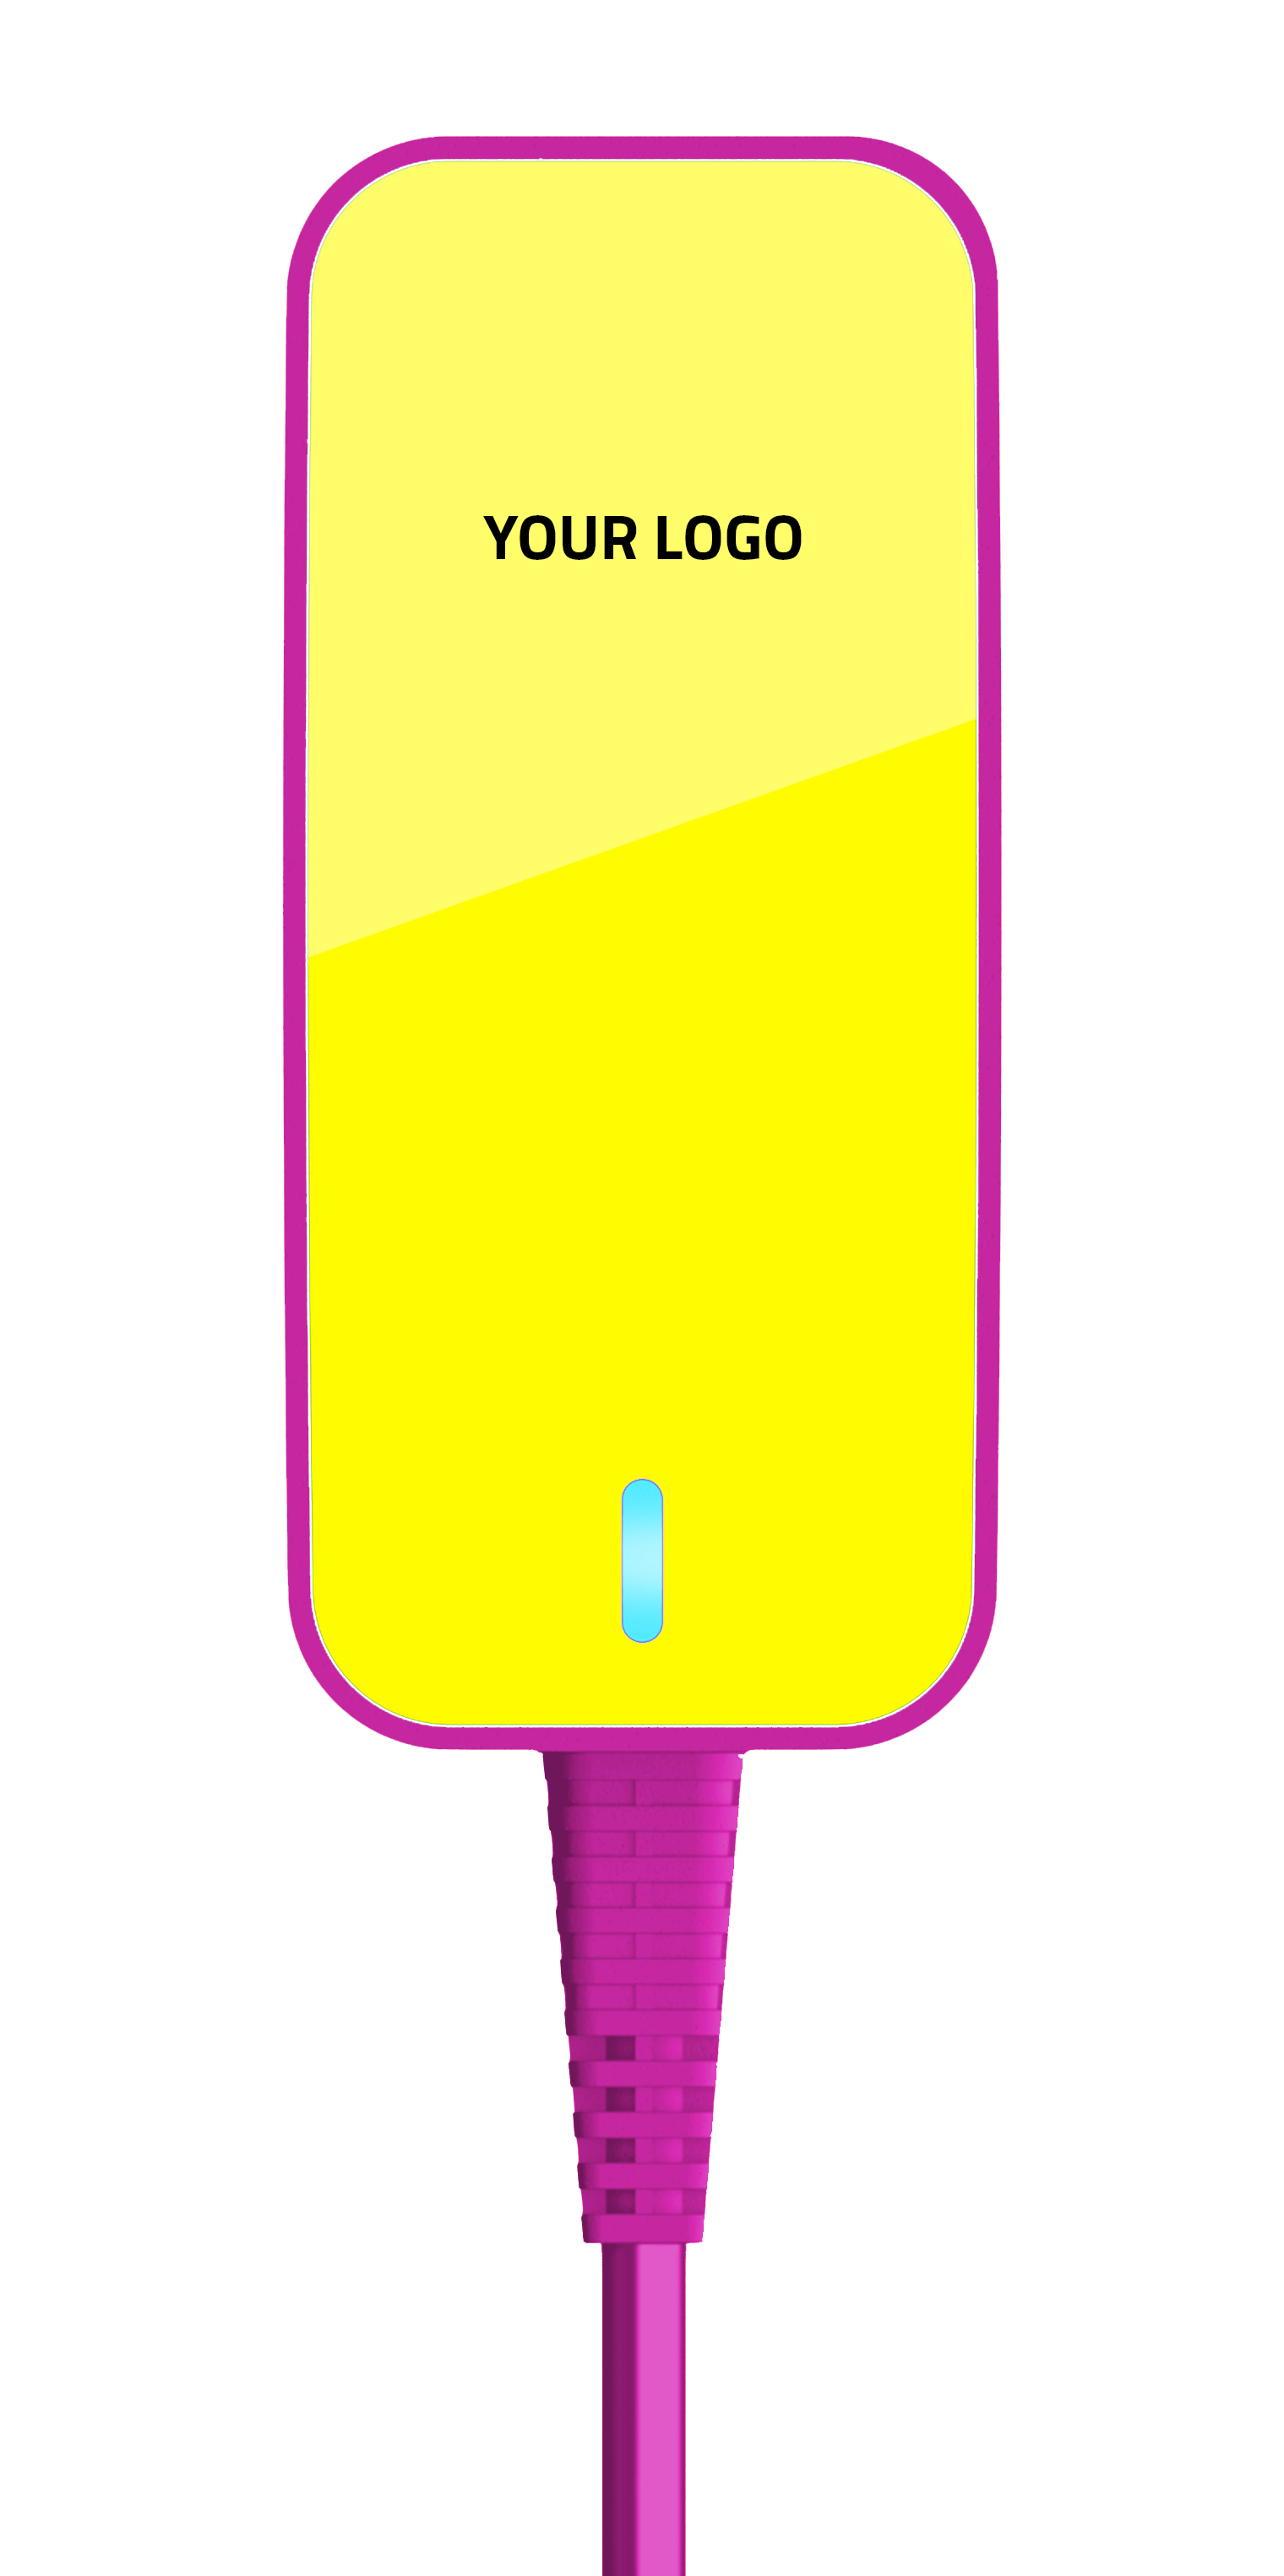 A yellow power supply with a pink trim and a green light on it.